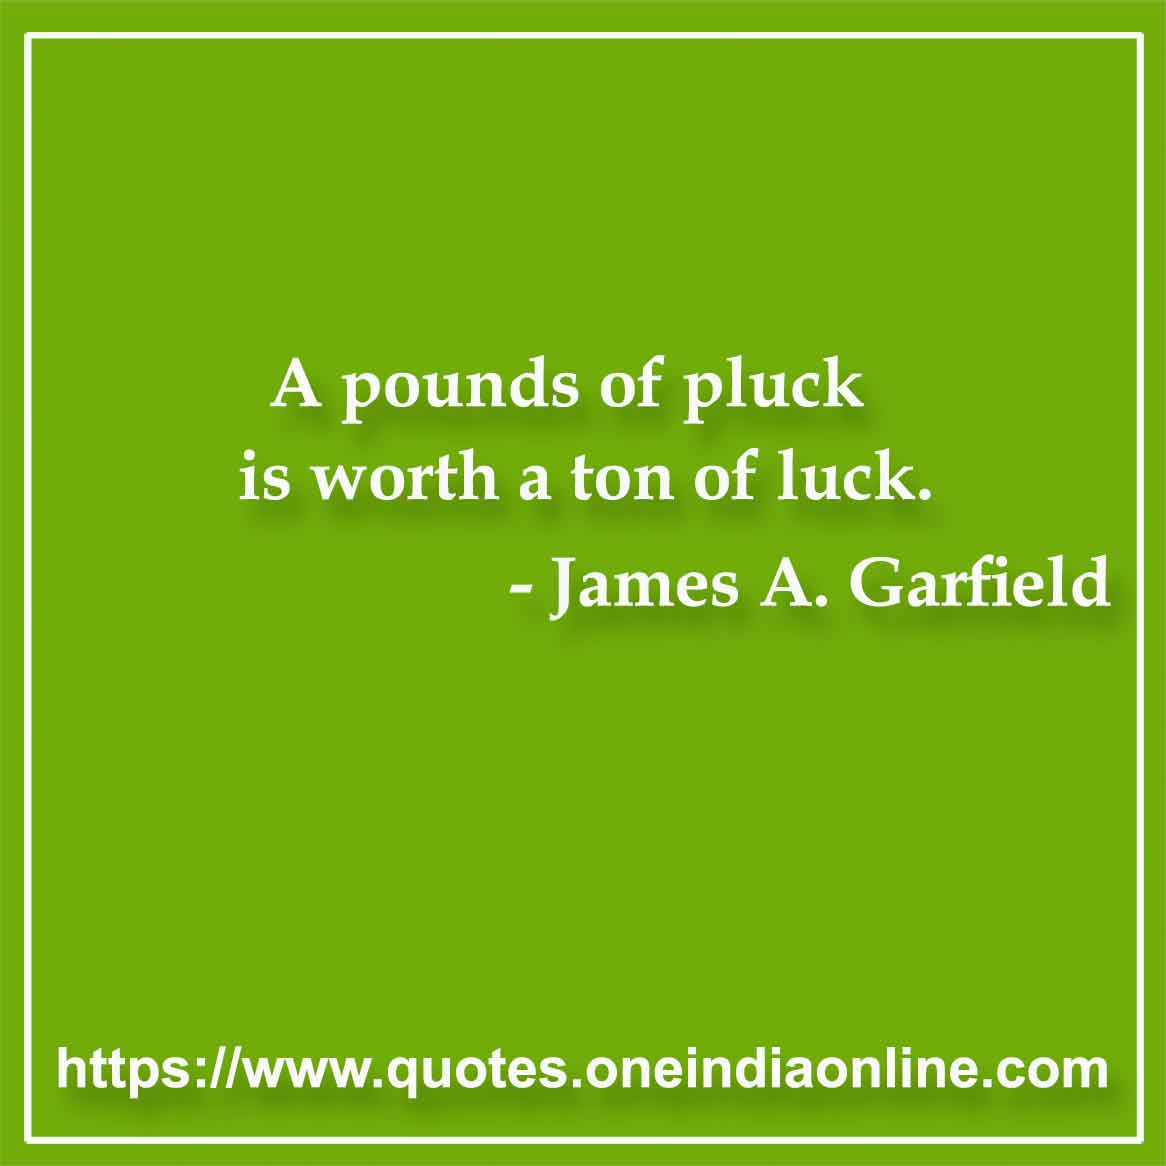 A pounds of pluck is worth a ton of luck.

- Luck Quotes by James A. Garfield